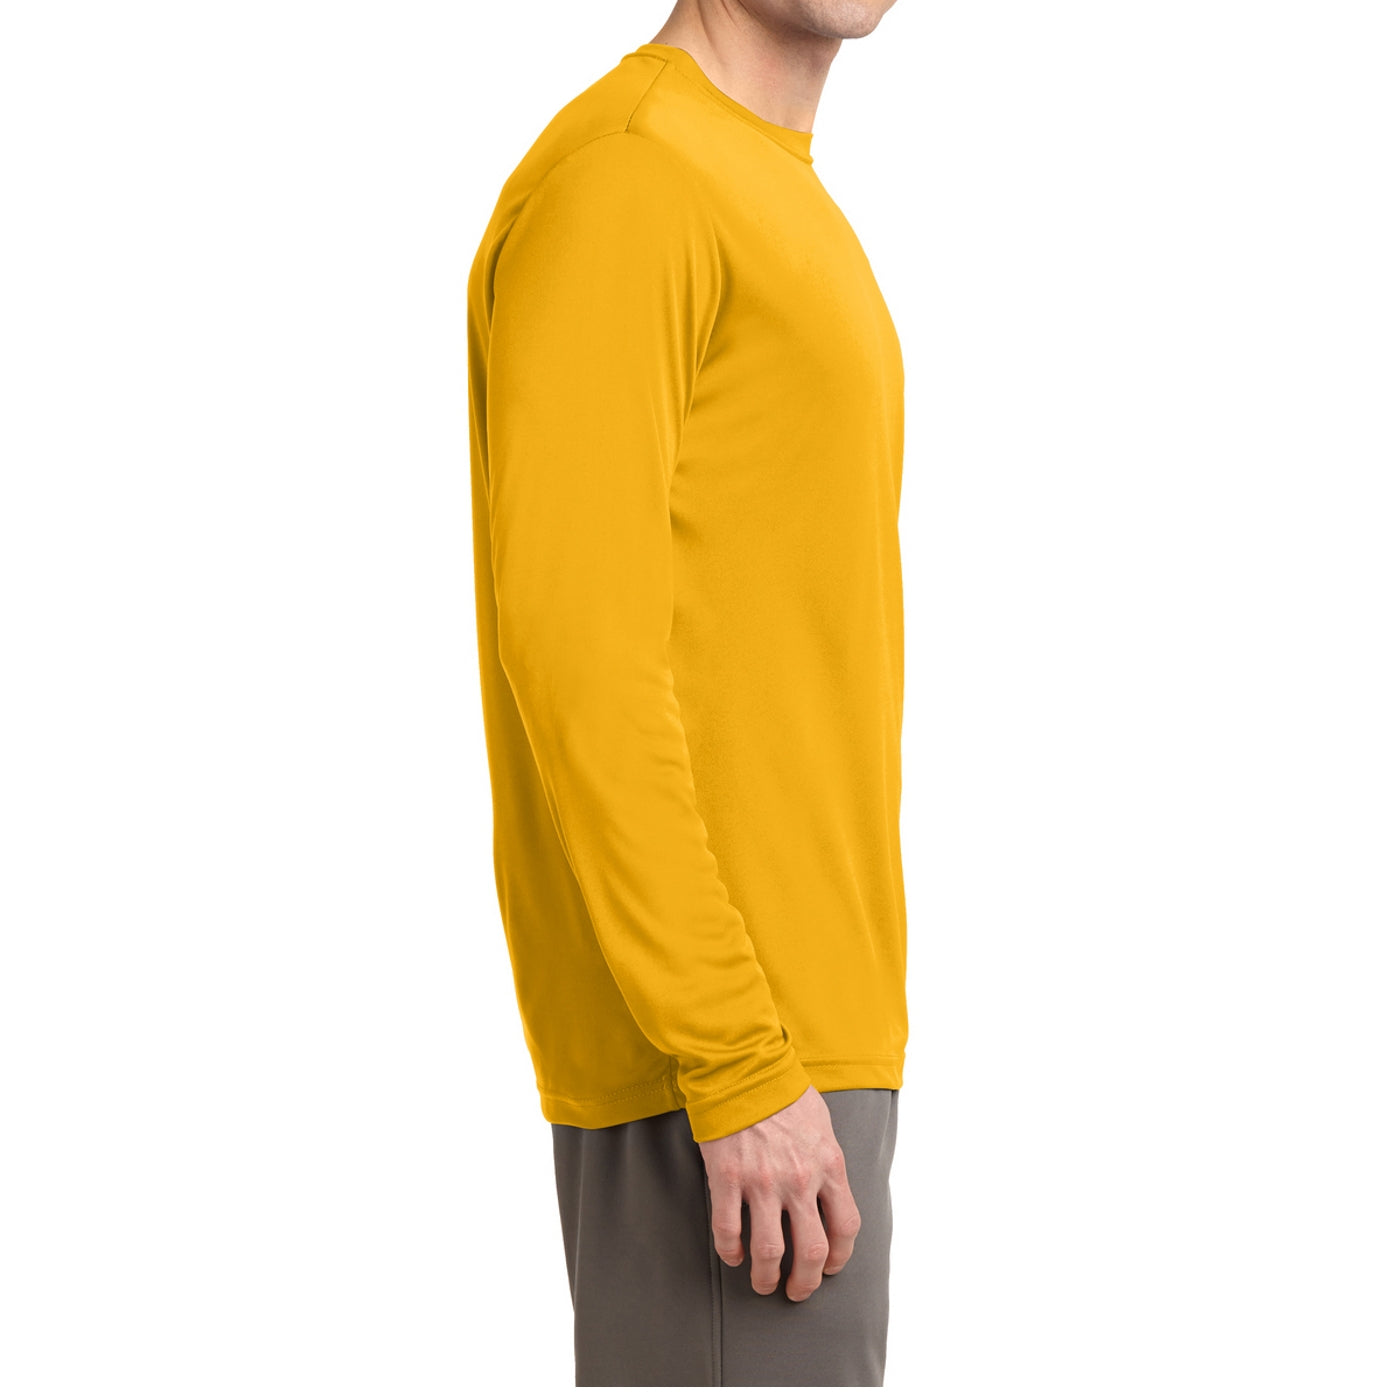 Men's Long Sleeve PosiCharge Competitor Tee - Gold